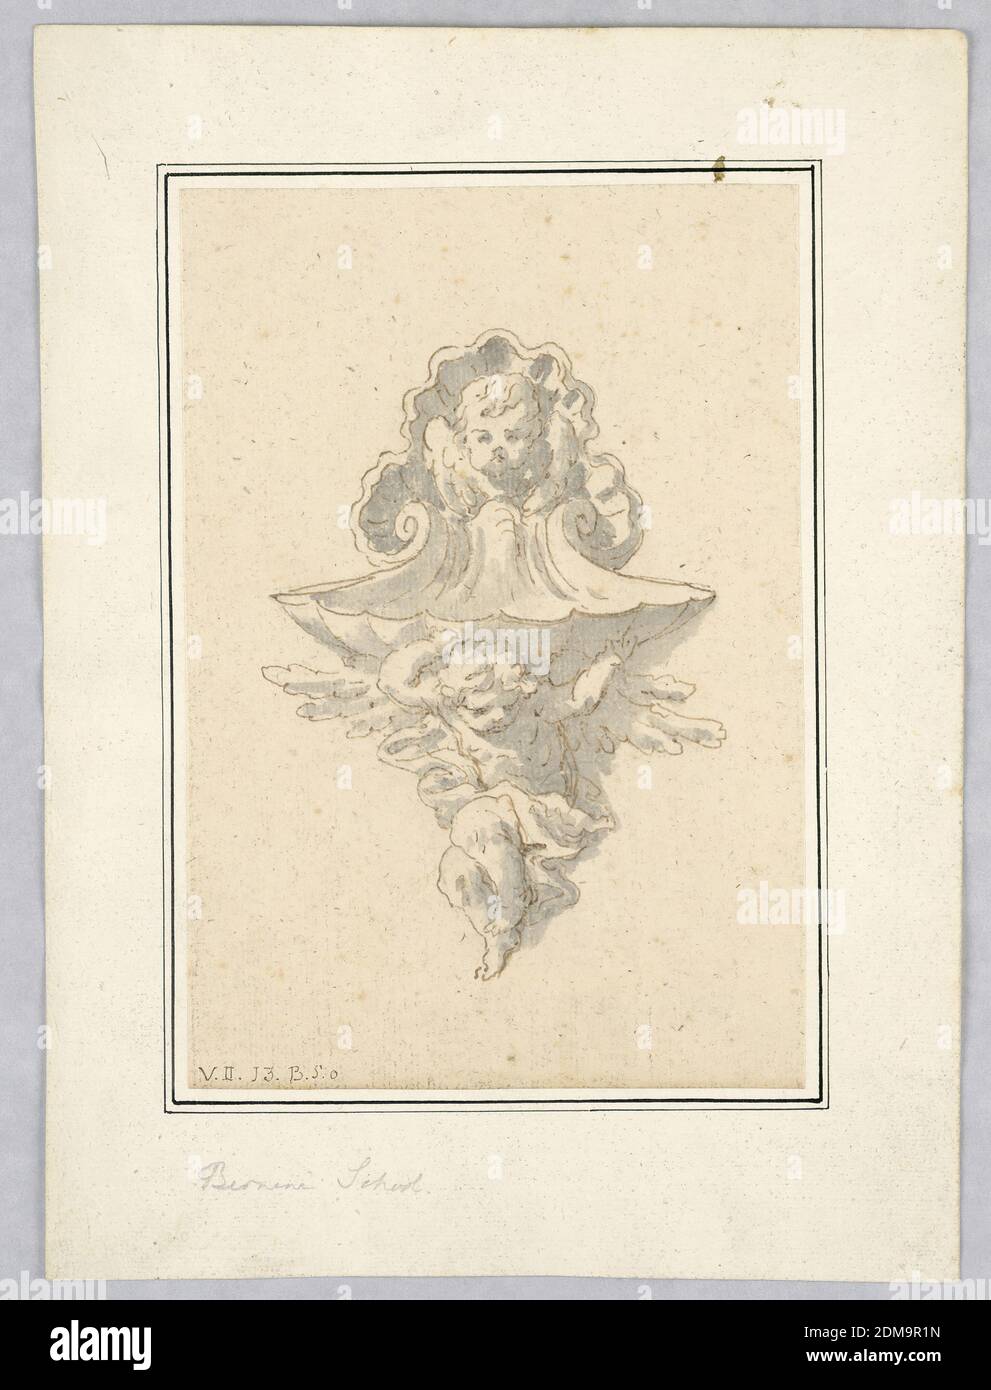 Design for a Basin, Pen and brown ink, brush and gray wash on cream laid paper on secondary paper support, Vertical rectangle. Design for a shell-shaped wall-mounted basin, supported by a cupid below. At top, bust of a cupid with wings framing the face against the background of a shell., Italy, 17th-19th century, architecture, Drawing Stock Photo